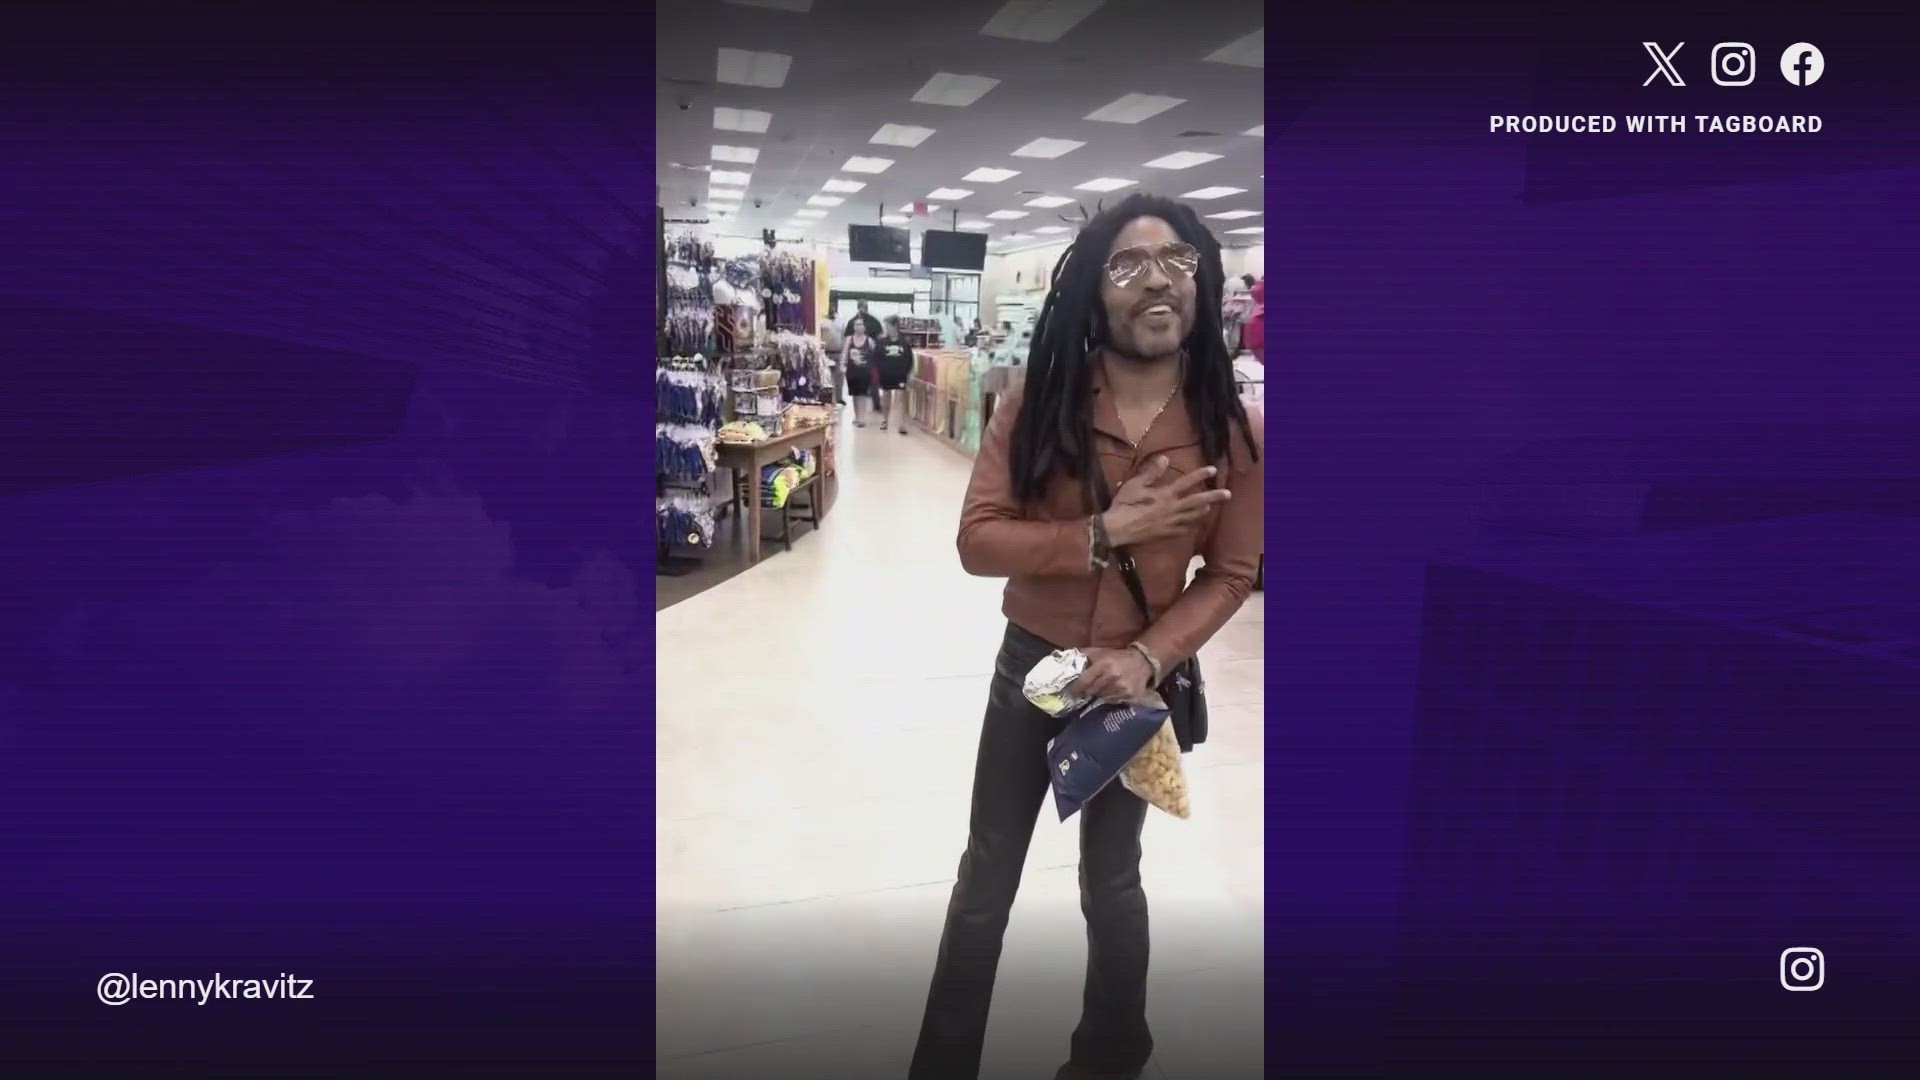 In the video posted to Instagram, Kravitz could be seen walking around the store, grabbing some snacks and posing and greeting customers.